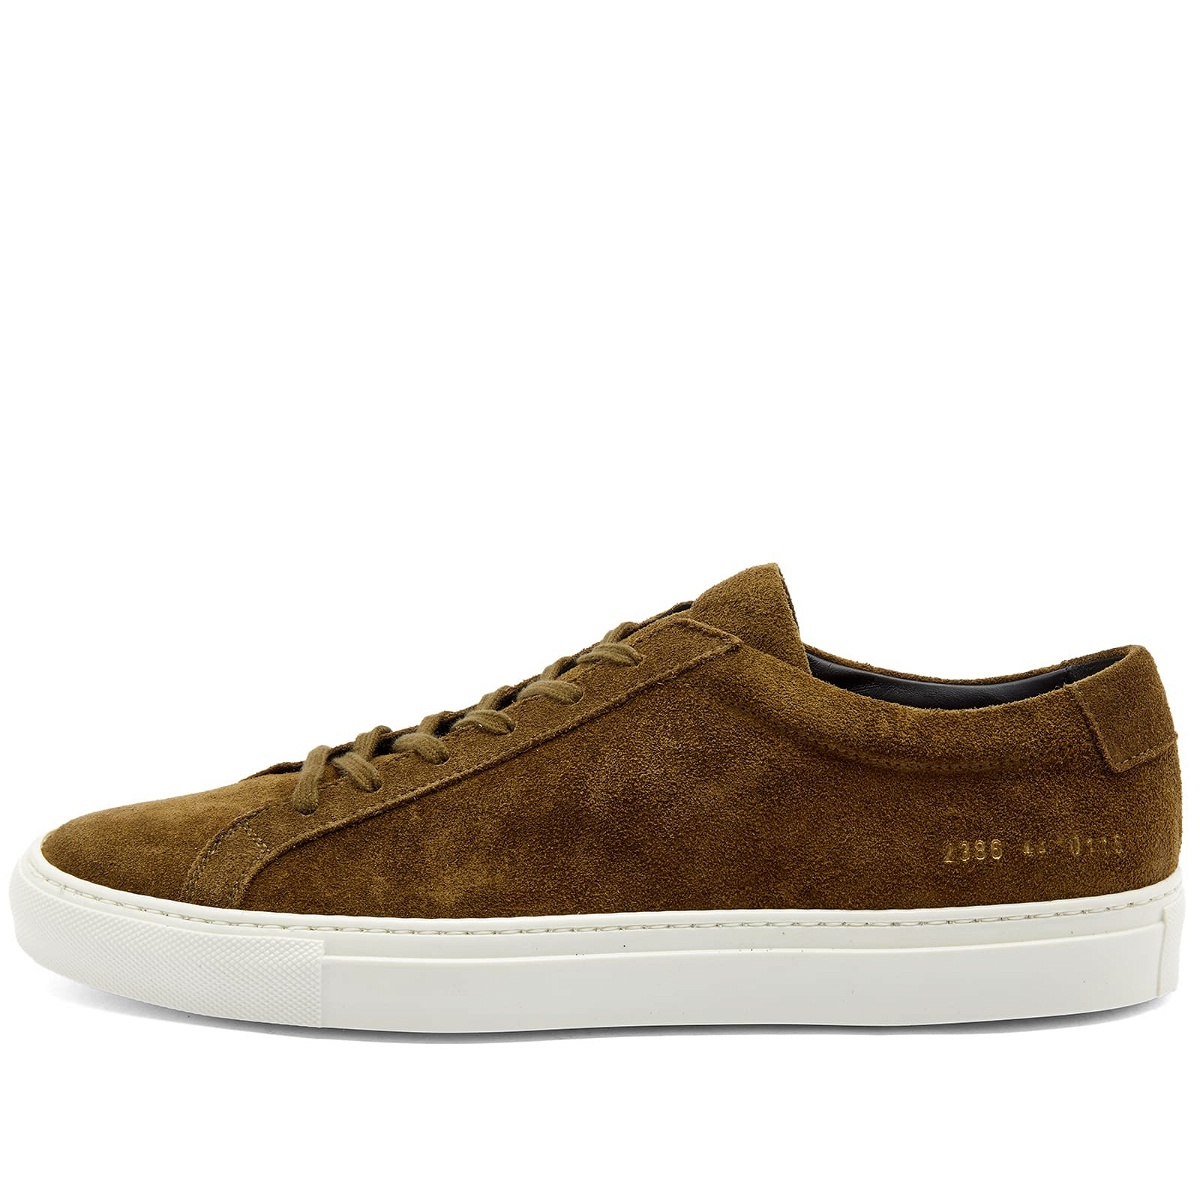 Common Projects Men's Achilles Low Waxed Suede Sneakers in Tobacco